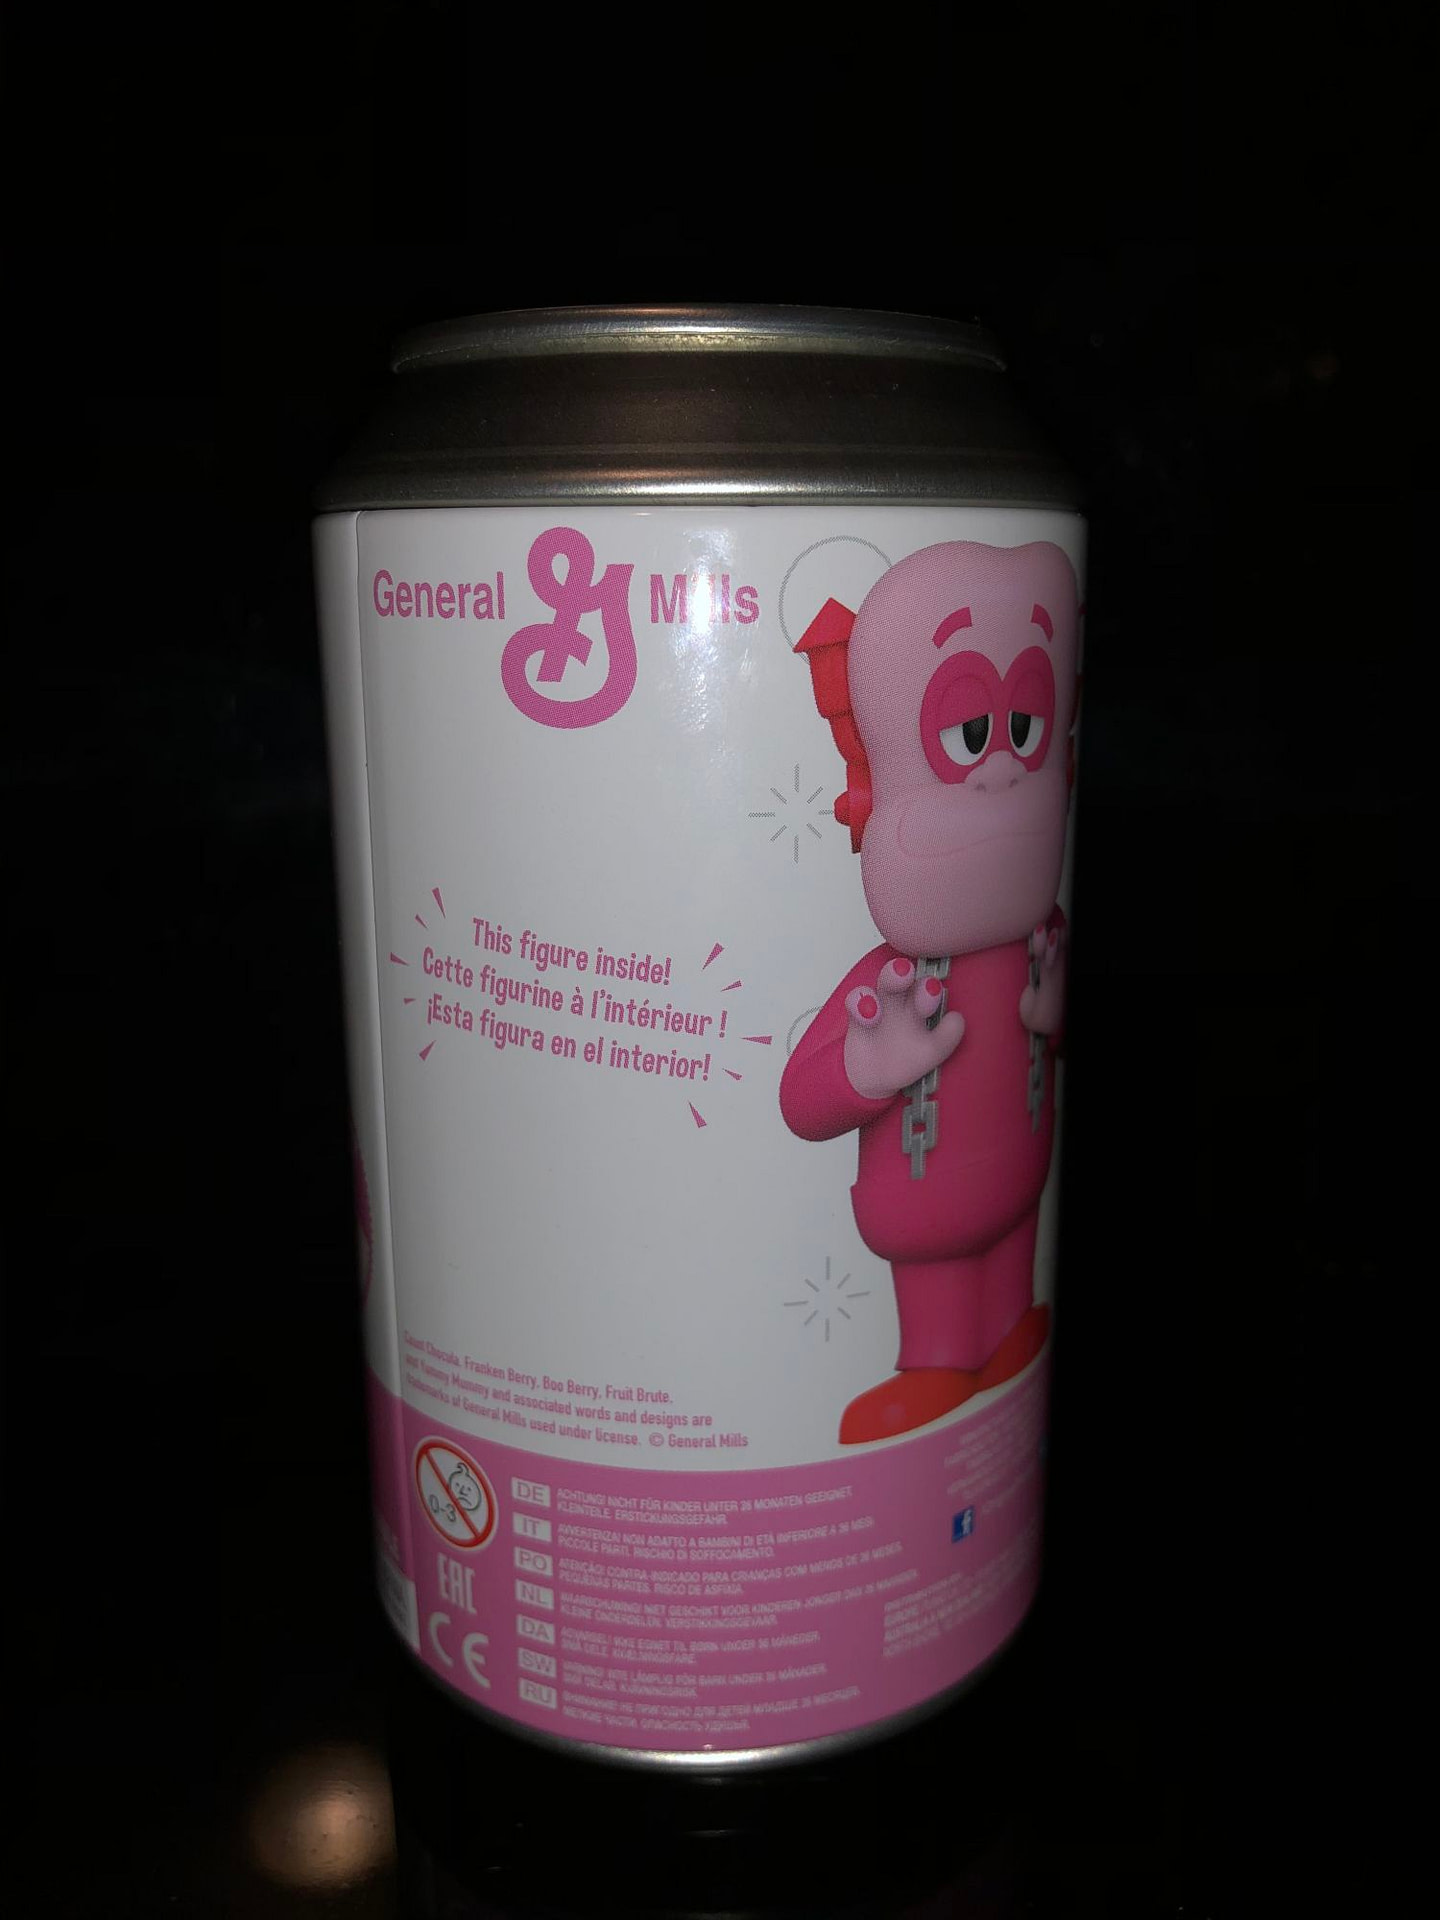 Funko Soda Brings Limited Edition Back to Collecting [Review]